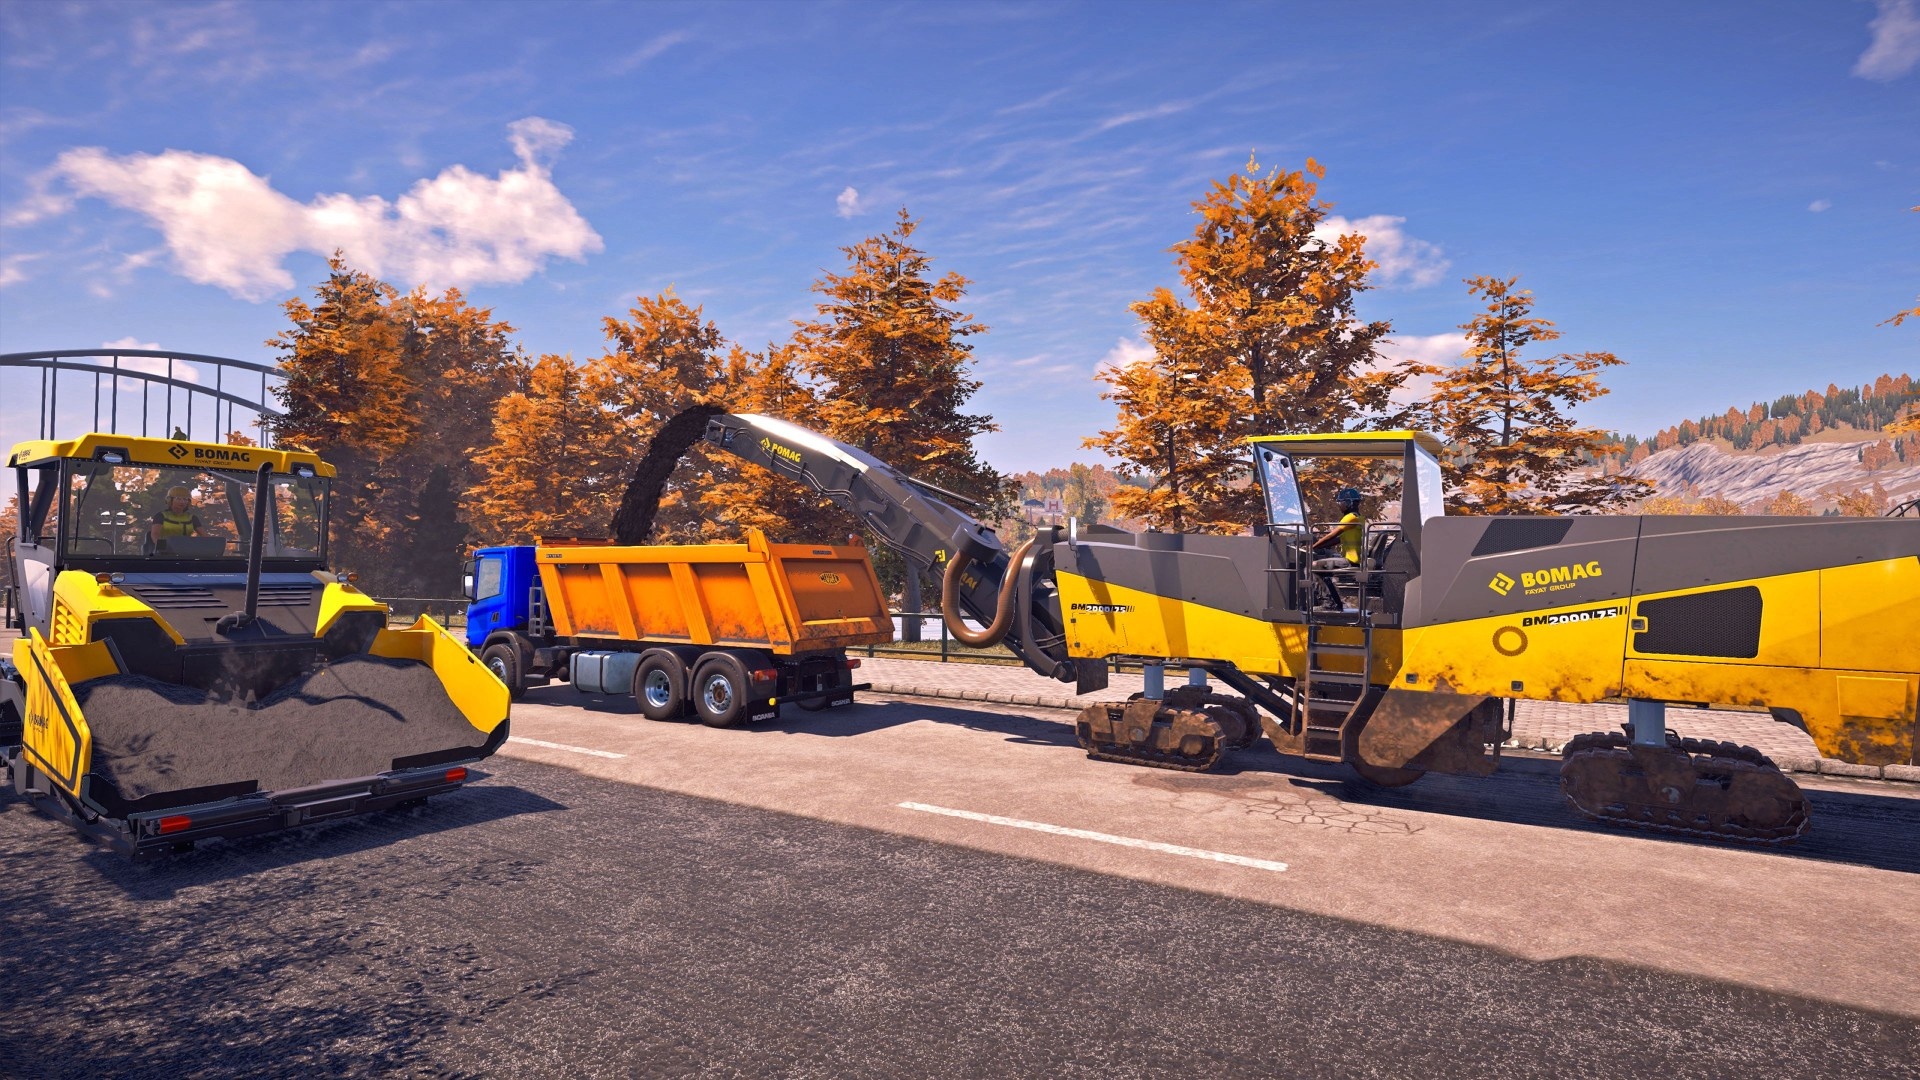 (Heavy machinery will be used for road construction. You can also do this in the construction simulator).